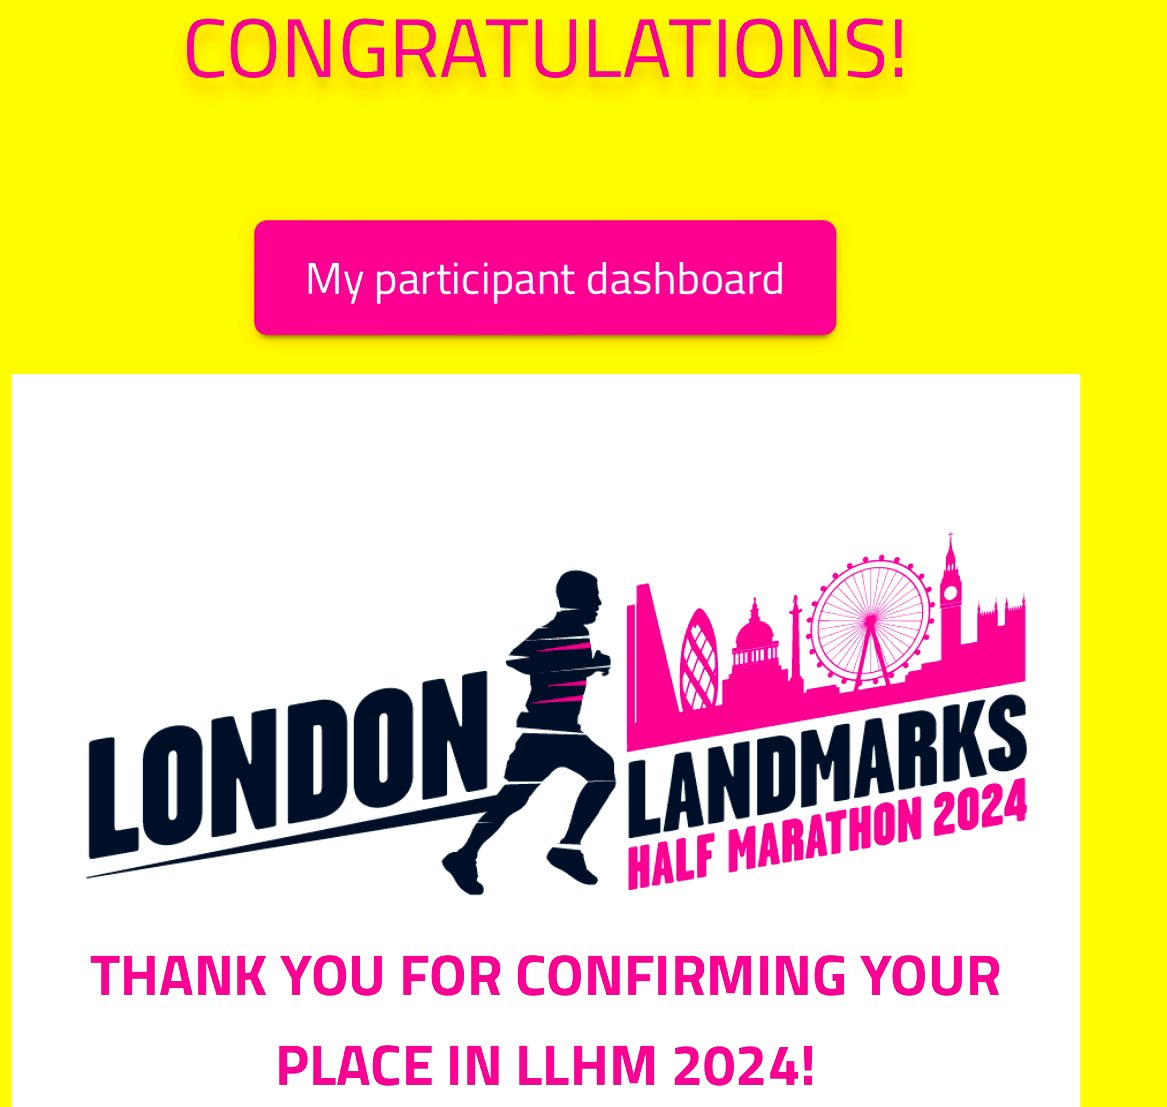 What have I done?! I got #FOMO this year &entered #llhm ballot. 1st entry, of 100ish friends, 2 of us have a place.  My running has been sporadic so need to find time to train- maybe  the #runningcommute is back? Hoping the showers at work are back in action! #southampton #llhm24